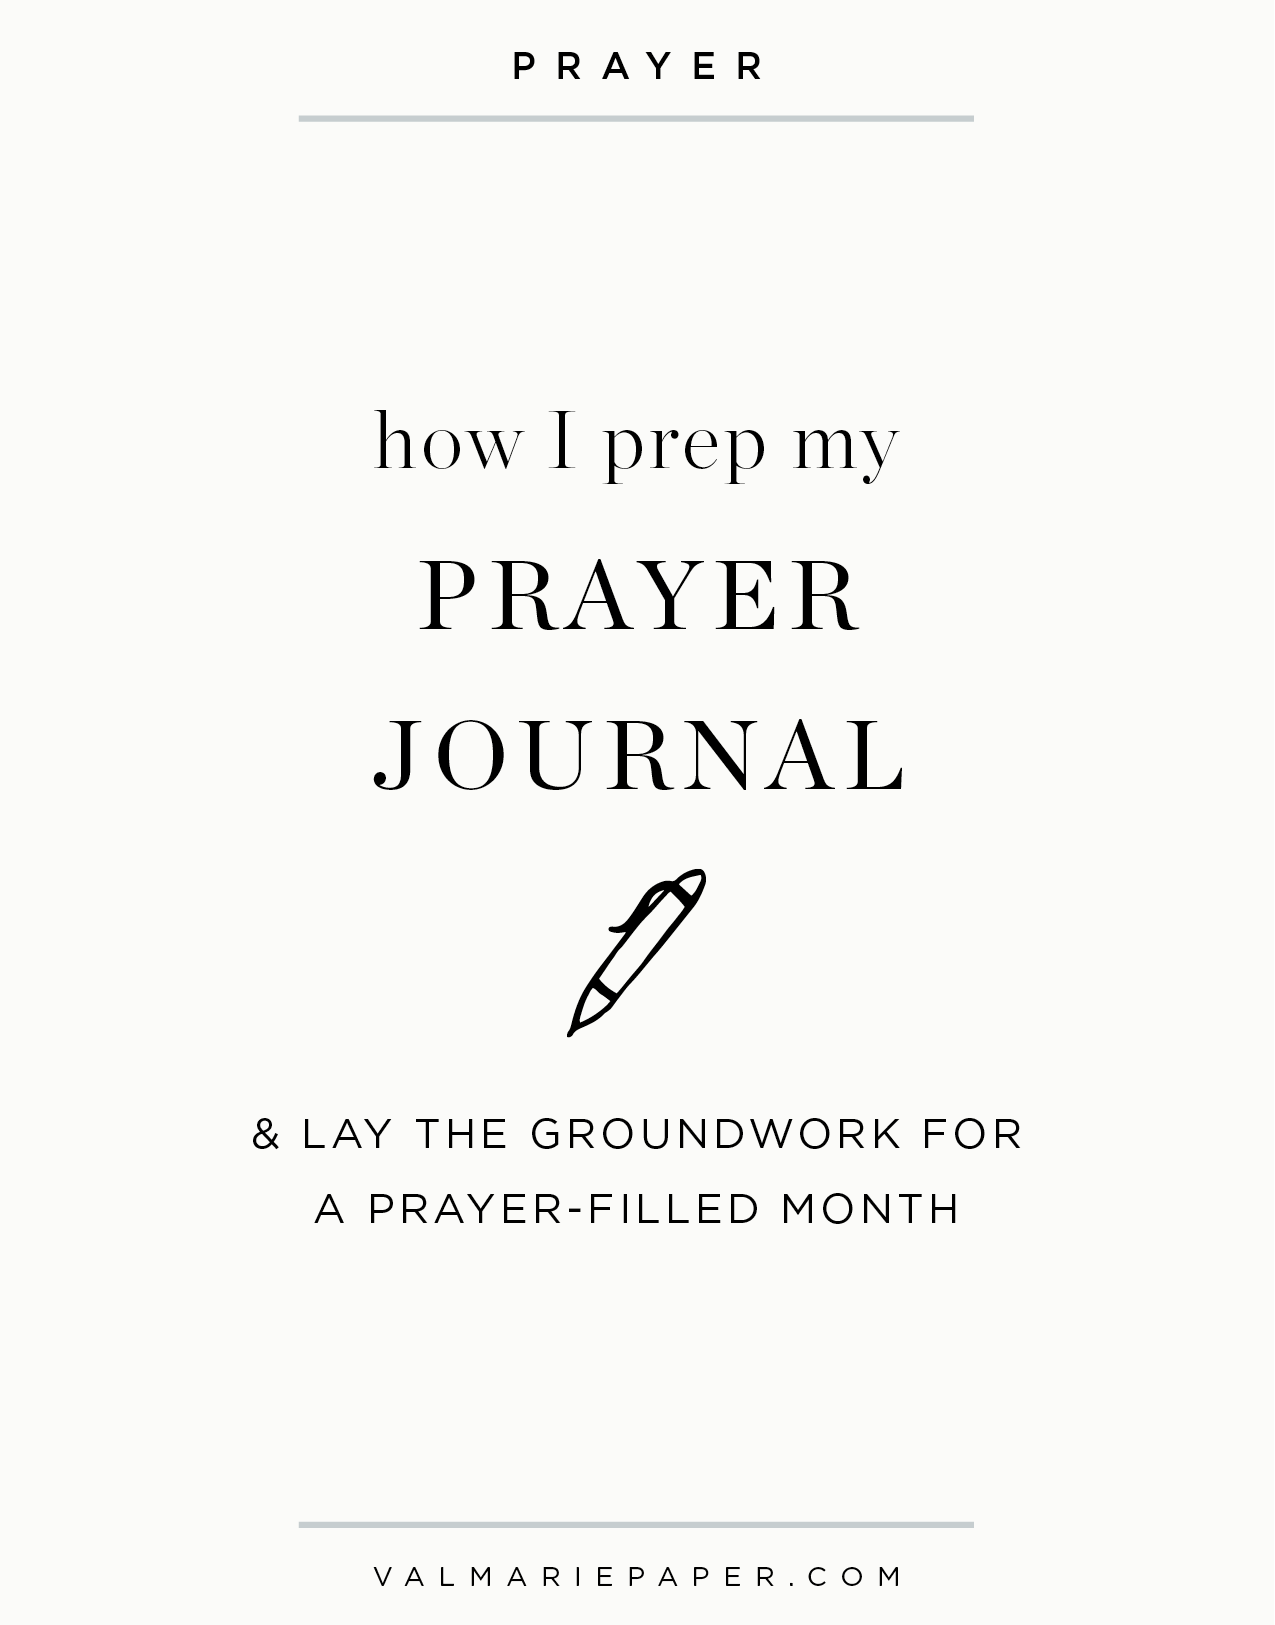 How I prep my prayer journal by Val Marie Paper | Valerie Woerner, diy, make, design, paper products, write, faith, spiritual, Christian, Bible, women's ministry, girls, prompts